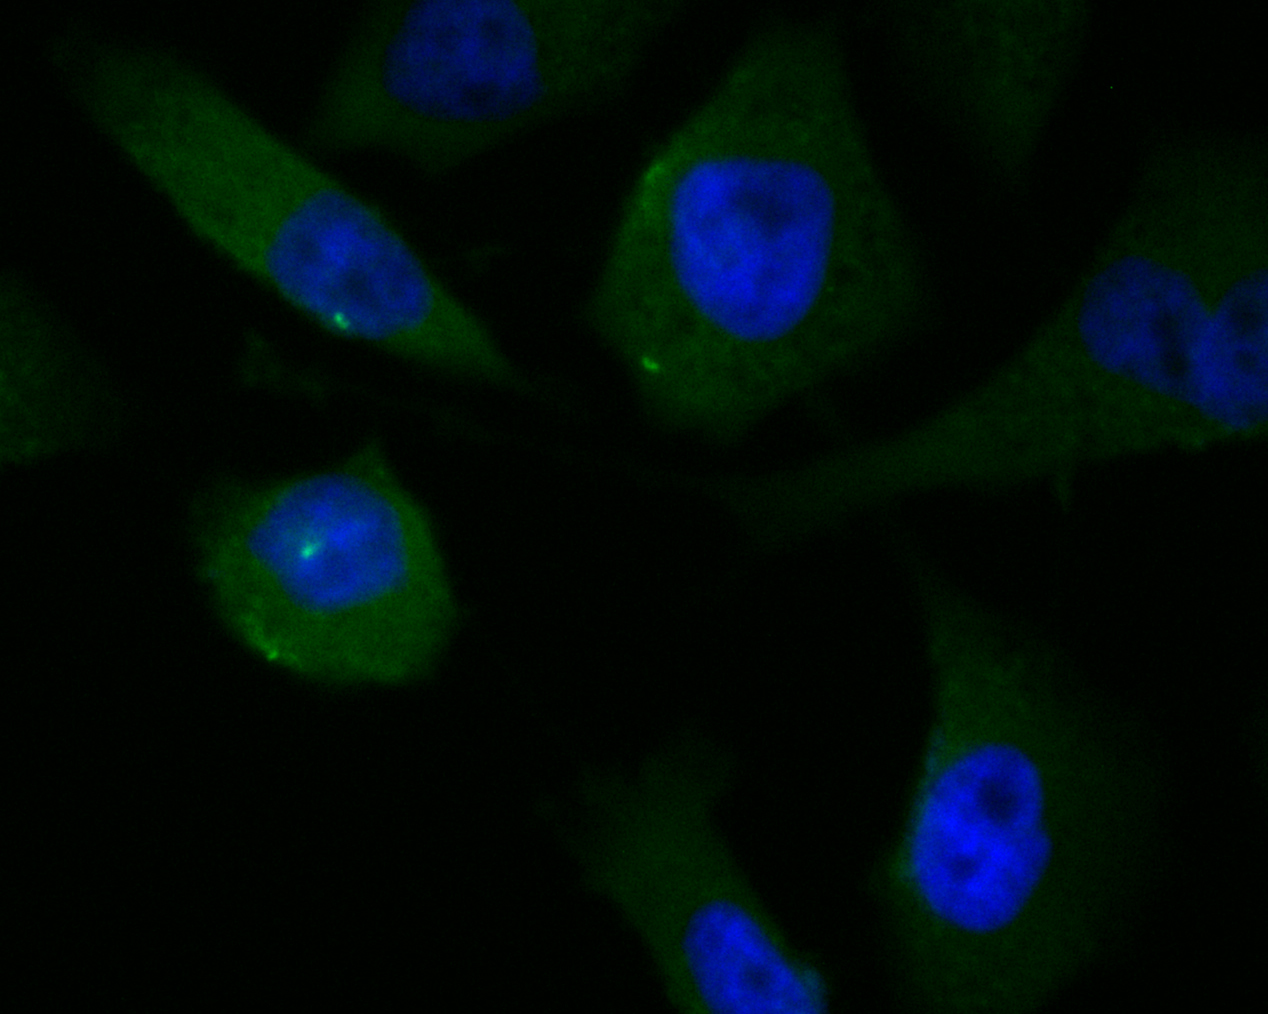 ICC staining of KCNMA1 in PC-3M cells (green). Formalin fixed cells were permeabilized with 0.1% Triton X-100 in TBS for 10 minutes at room temperature and blocked with 1% Blocker BSA for 15 minutes at room temperature. Cells were probed with the primary antibody (ER1902-04, 1/100) for 1 hour at room temperature, washed with PBS. Alexa Fluor®488 Goat anti-Rabbit IgG was used as the secondary antibody at 1/100 dilution. The nuclear counter stain is DAPI (blue)